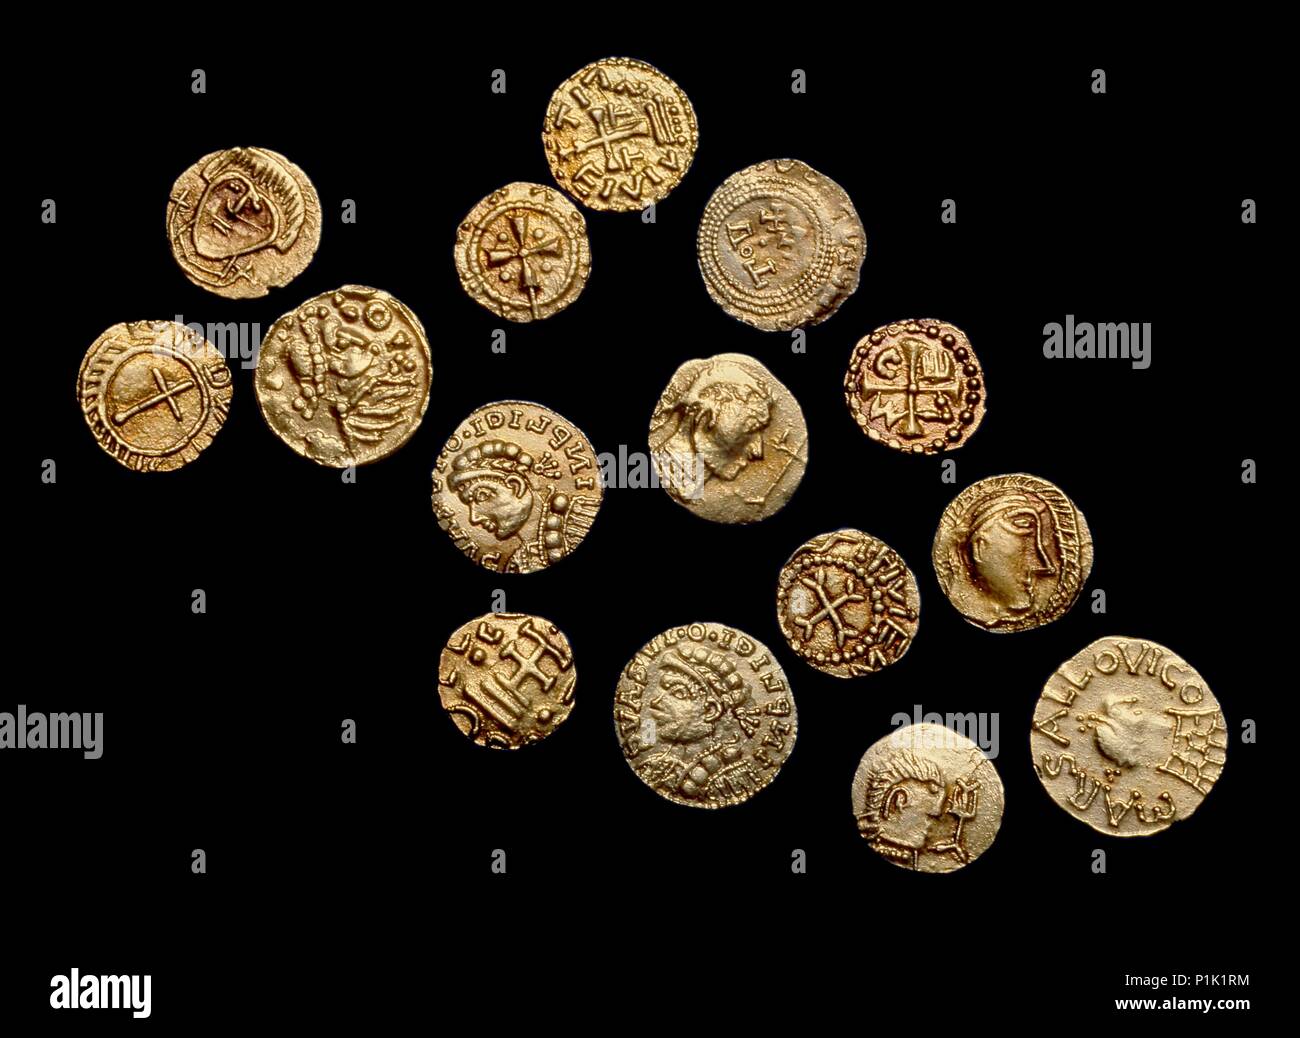 Complete non-local Anglo-Saxon Coin Hoard (The Crondall Hoard), 7th century. Artist: Unknown. Stock Photo